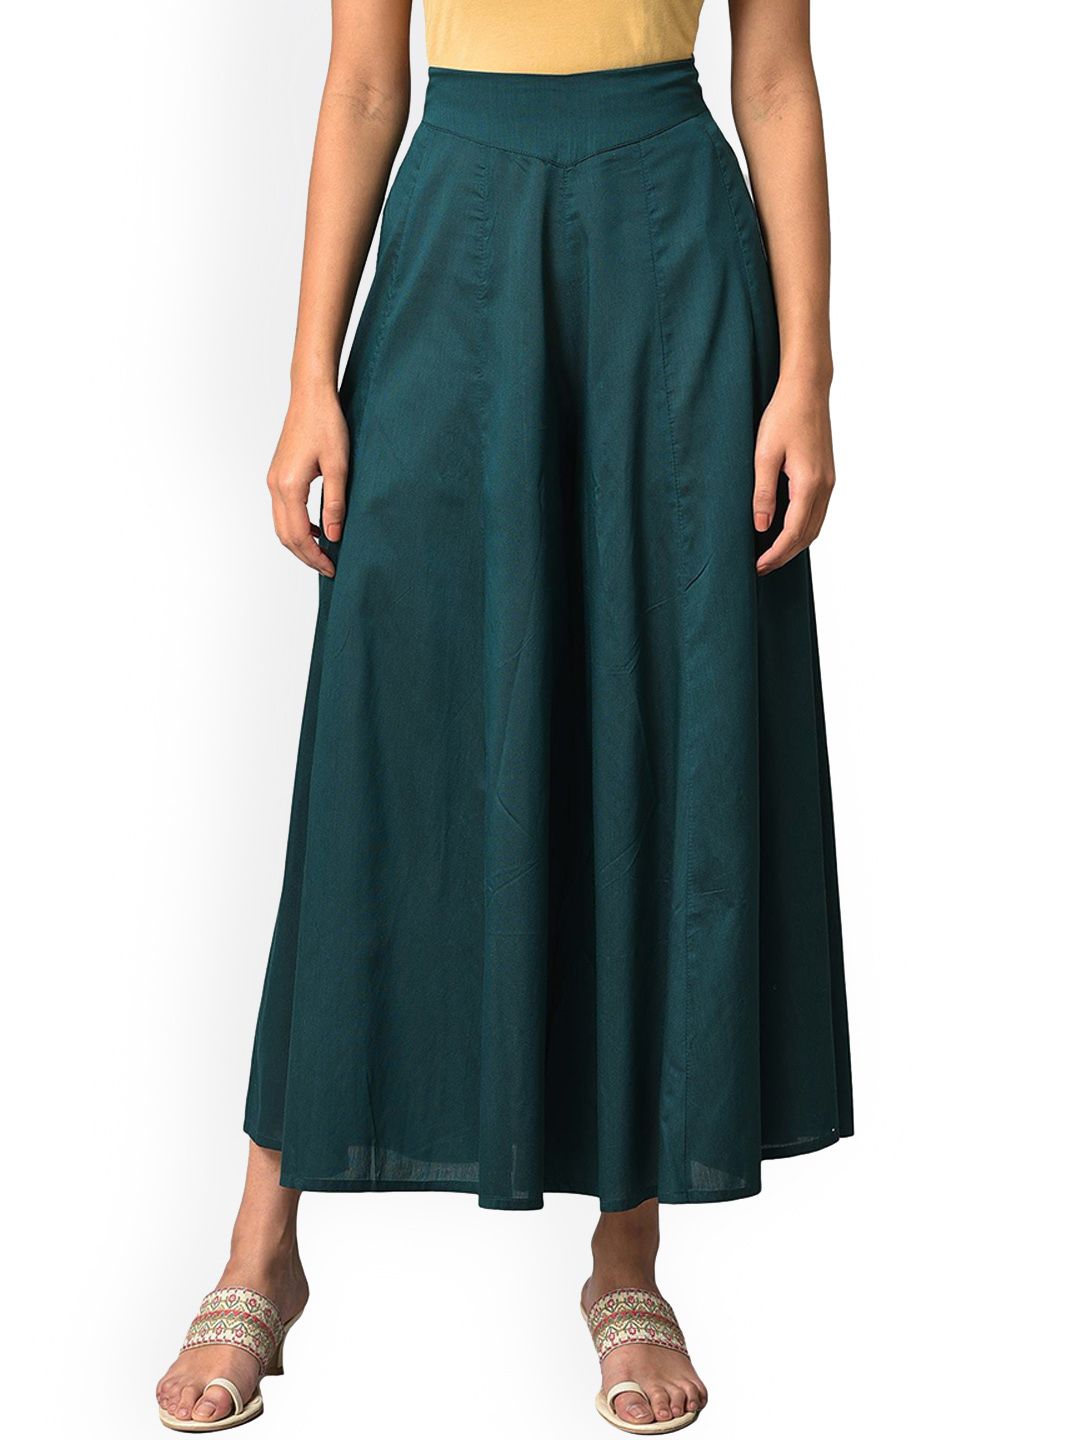 W Women Flared Maxi A-Line Skirt Price in India